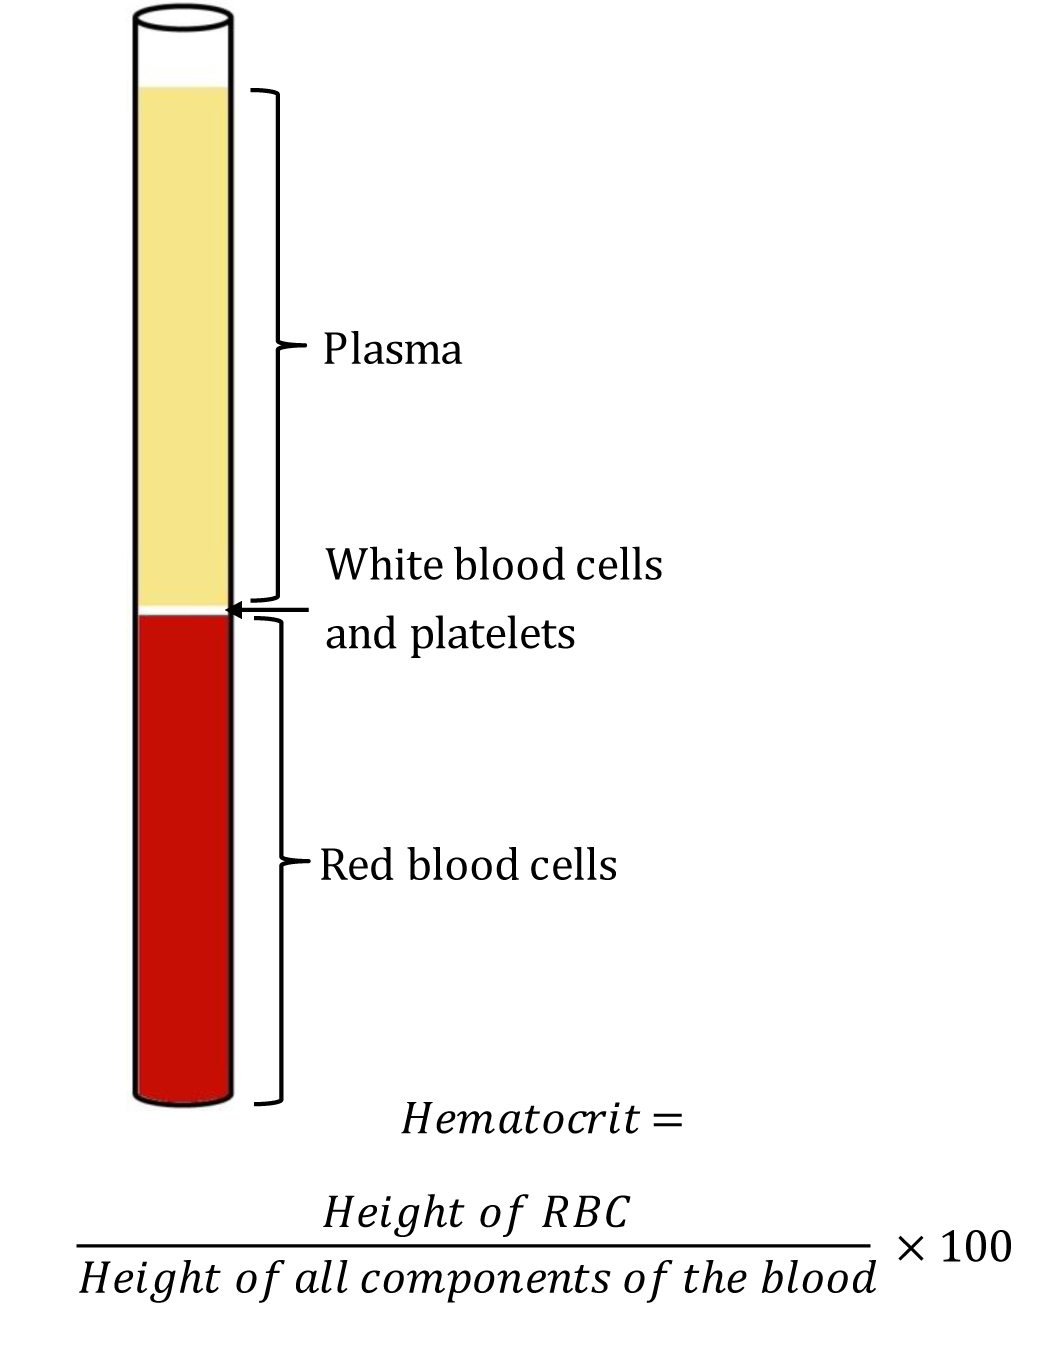 Wintrobe hematocrit tube containing components of blood after centrifugation